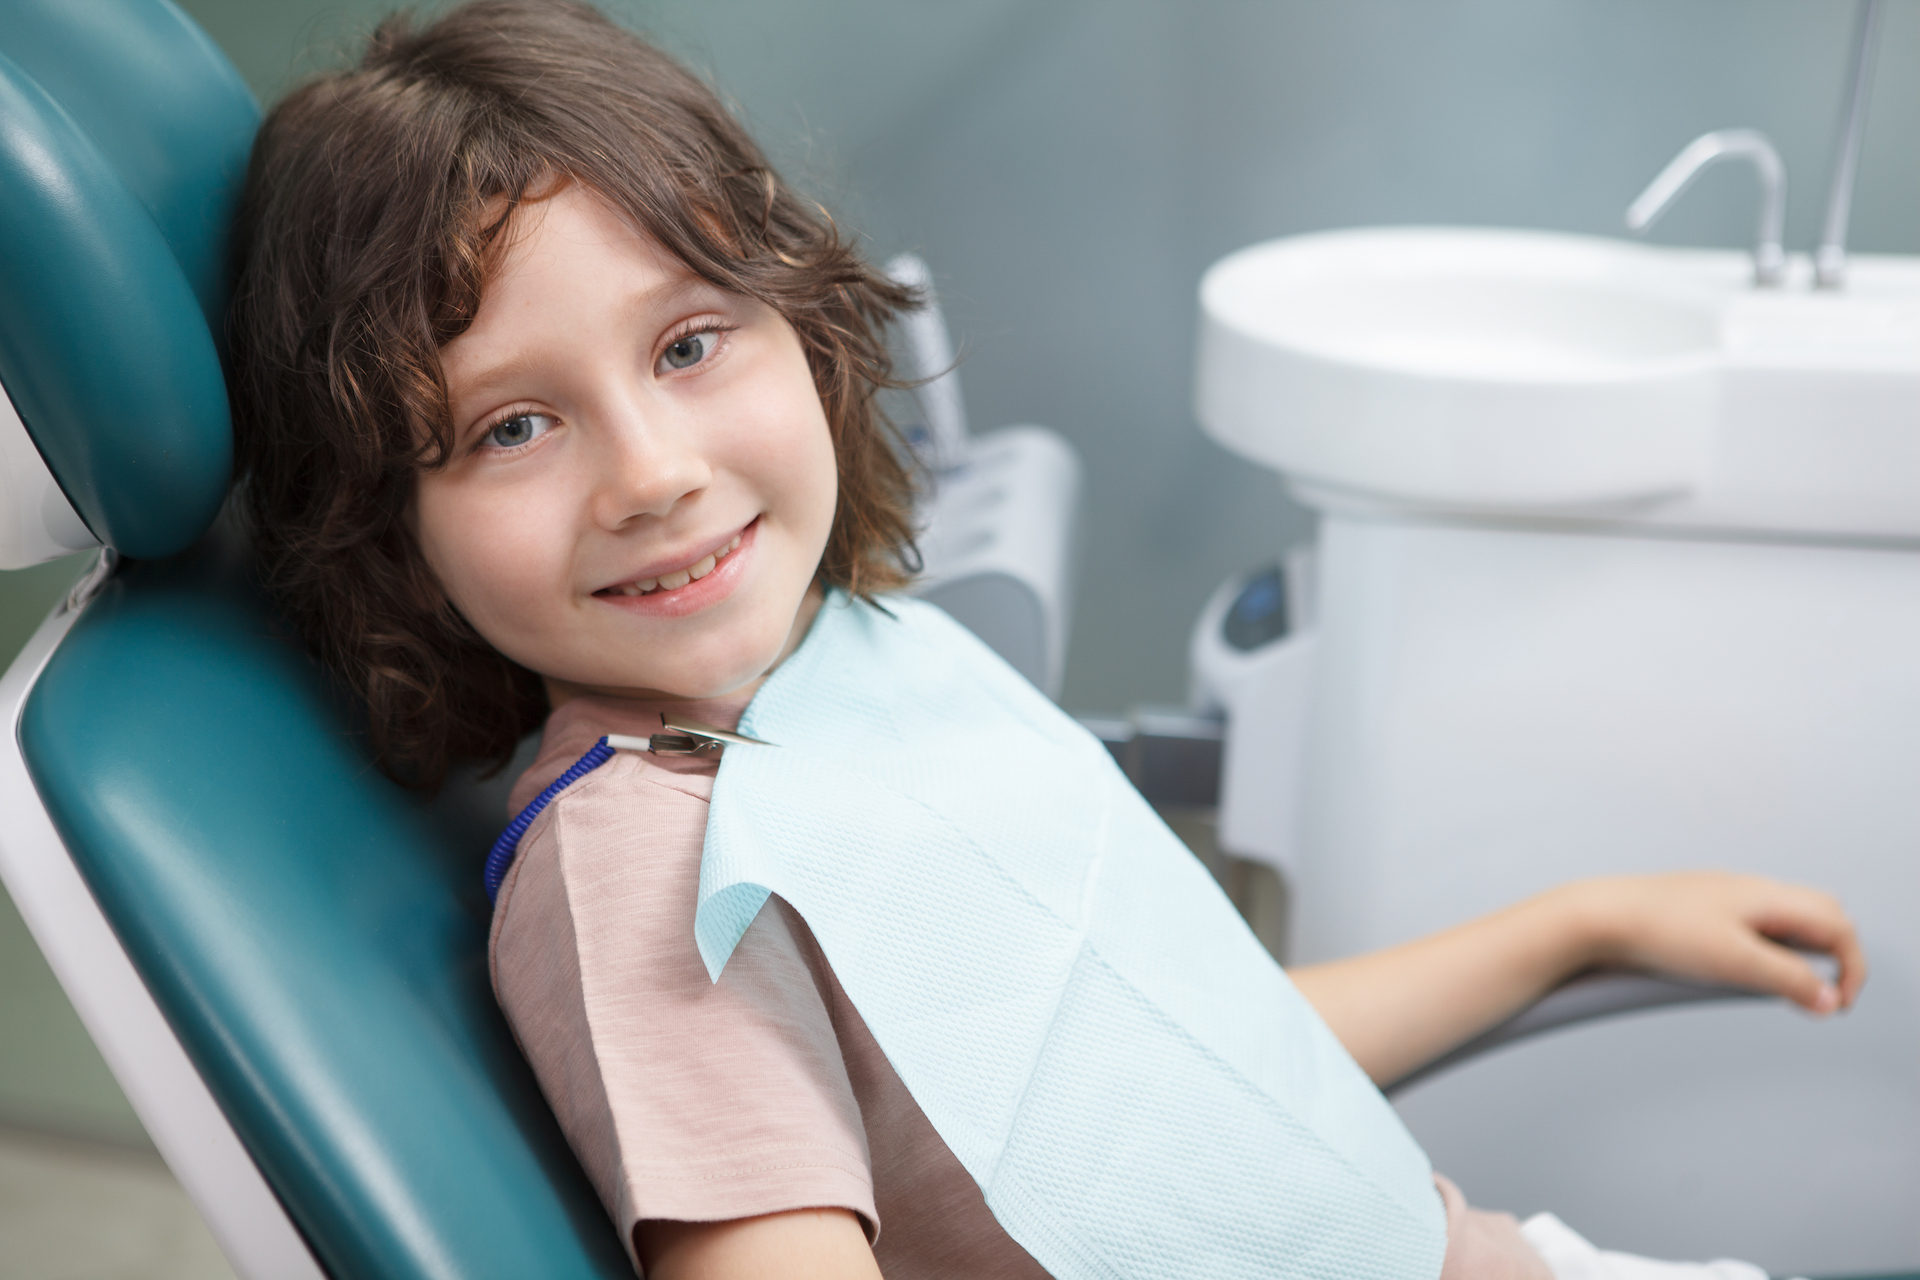 Lovely happy young boy smiling to the camera, sitting relaxed in dental chair